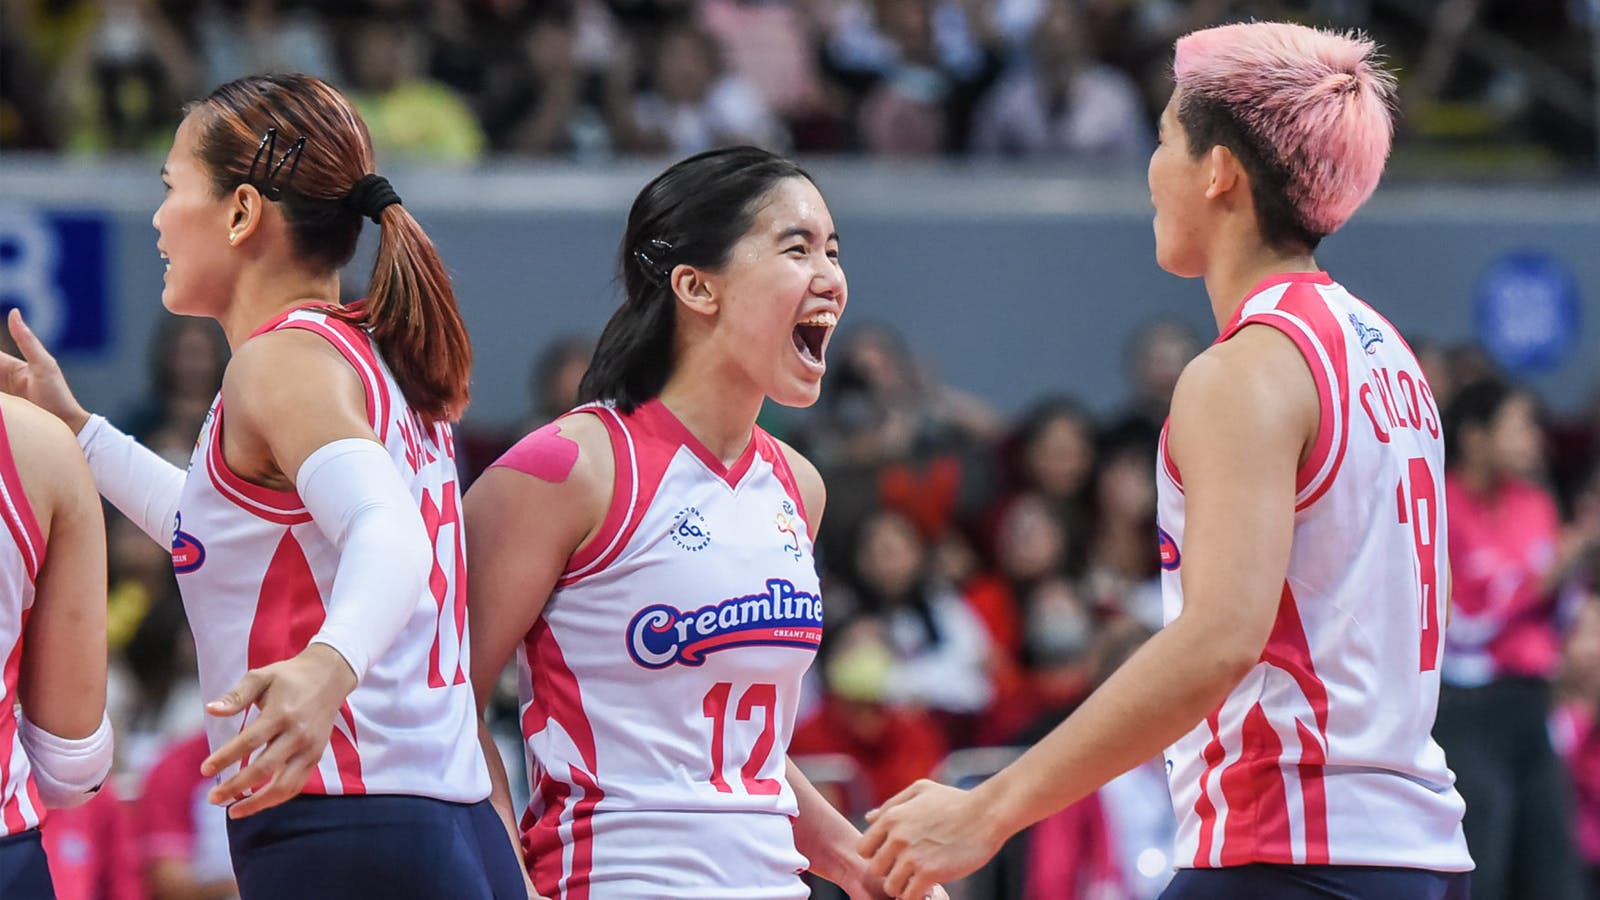 Creamline very ready for Game 3 challenge, says Jia De Guzman, as defending champs outlast Petro Gazz in thrilling Game 2